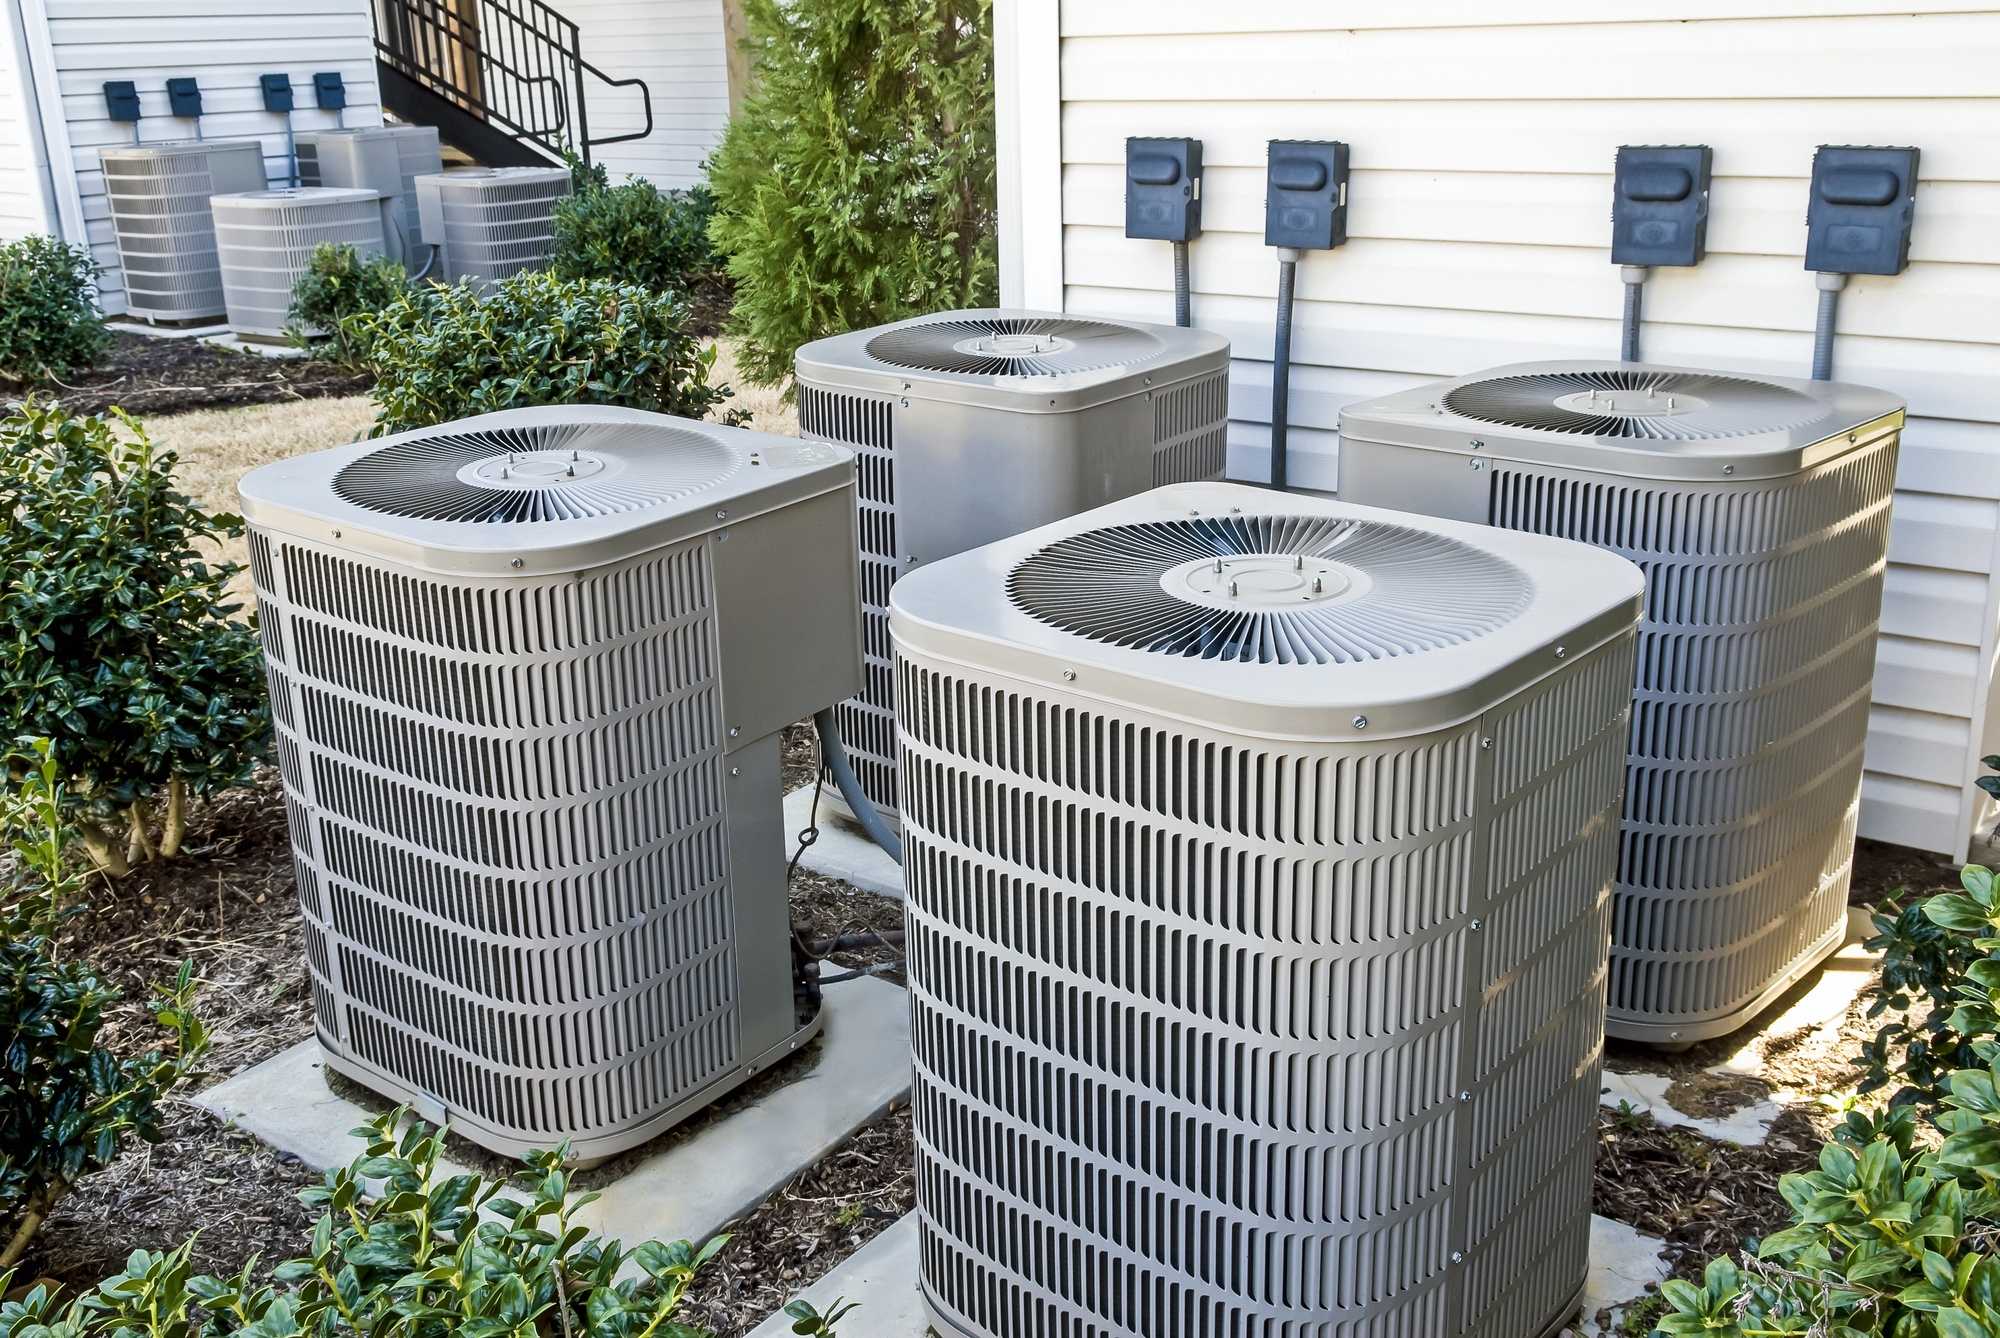 Do you want to know more about the new construction HVAC cost but don't know where to start? Keep reading and learn more here.